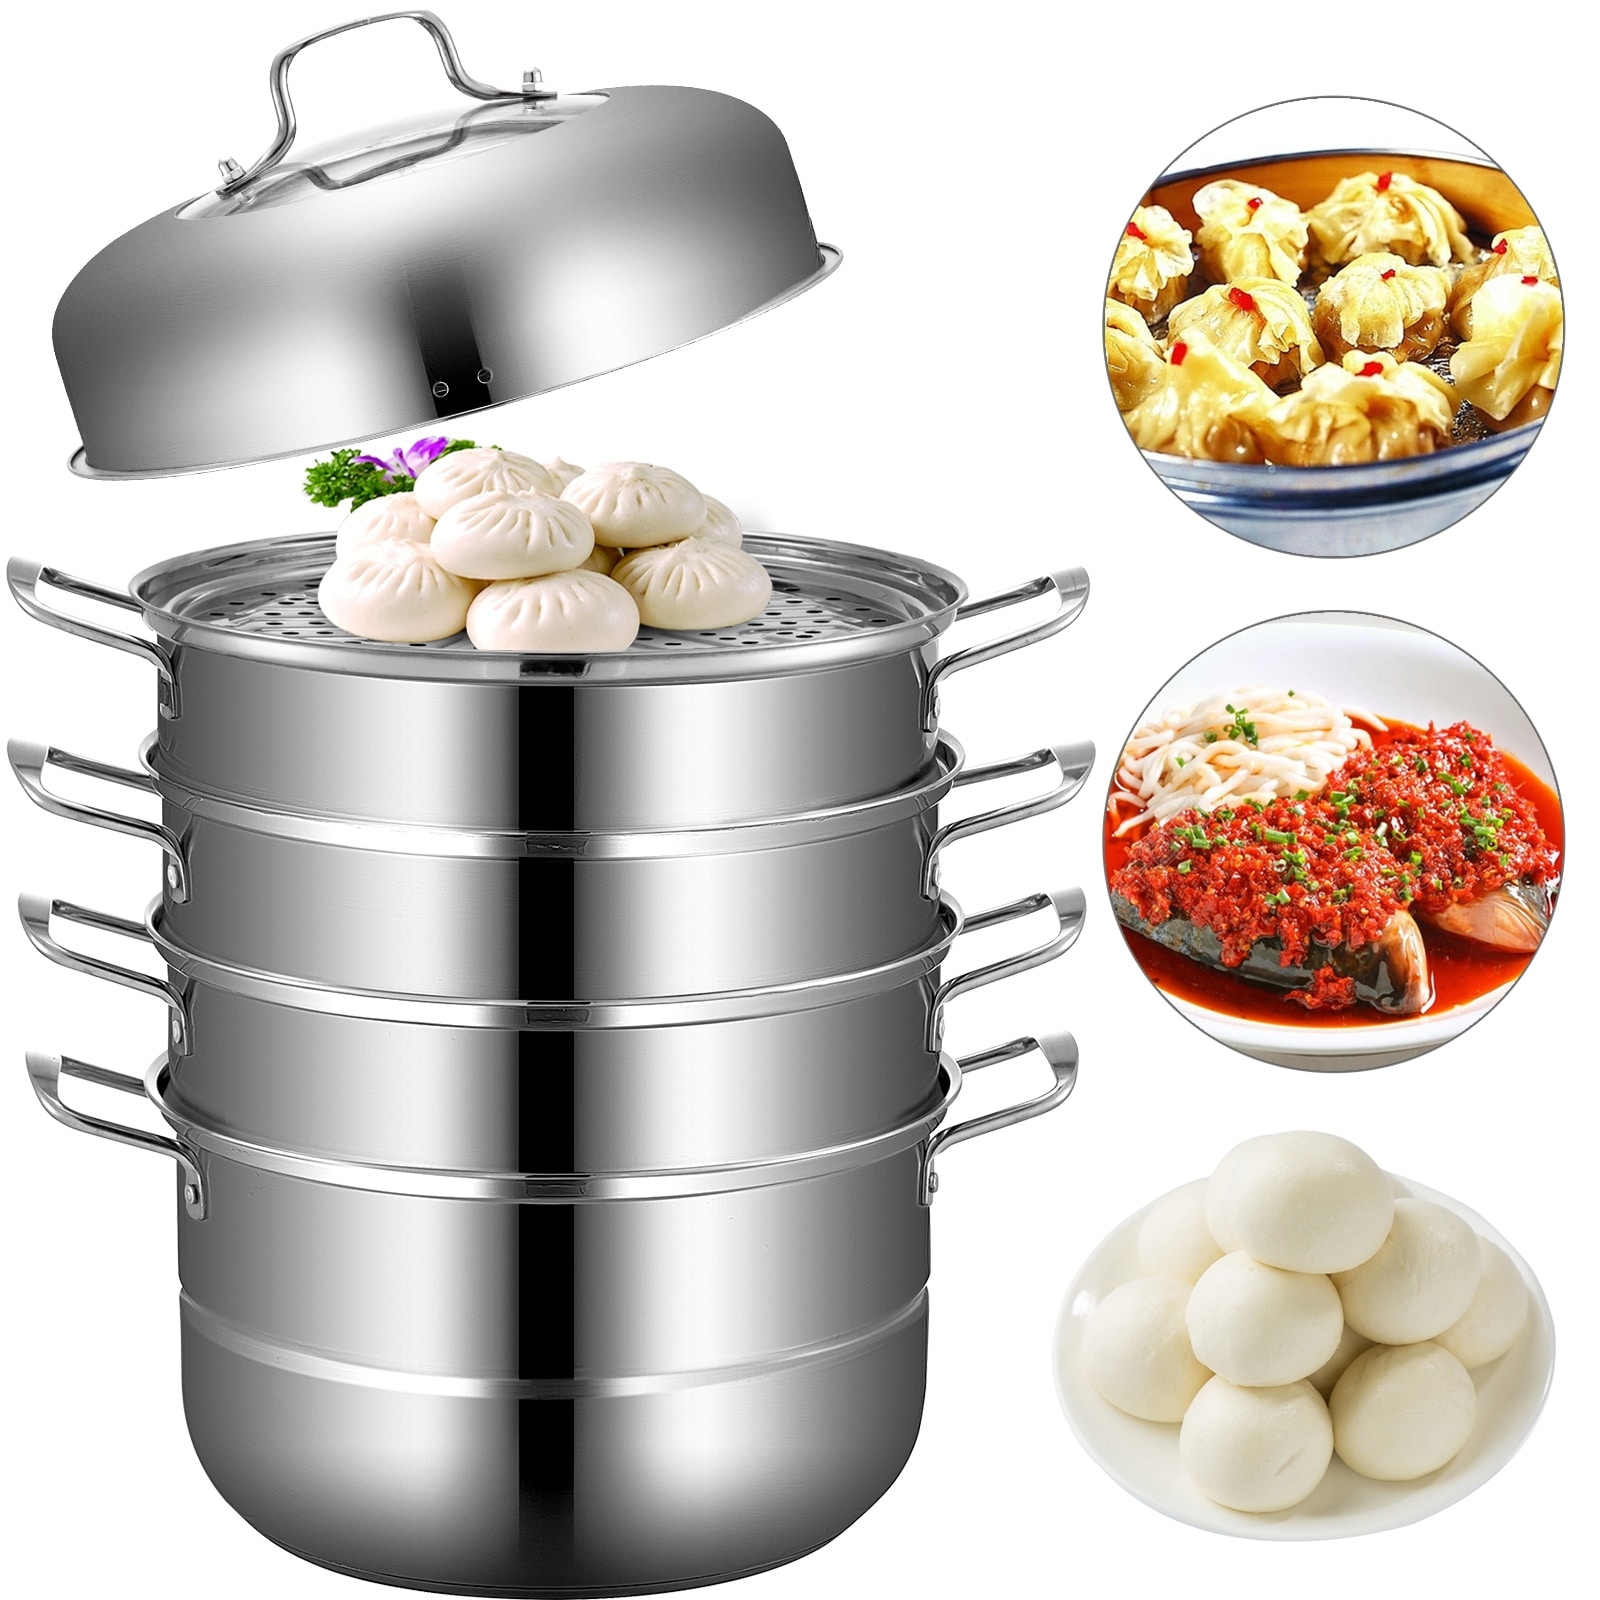 4PC/5PC STEAMER COOKER POT SET PAN COOK FOOD GLASS LIDS 3/4 TIER STAINLESS  STEEL